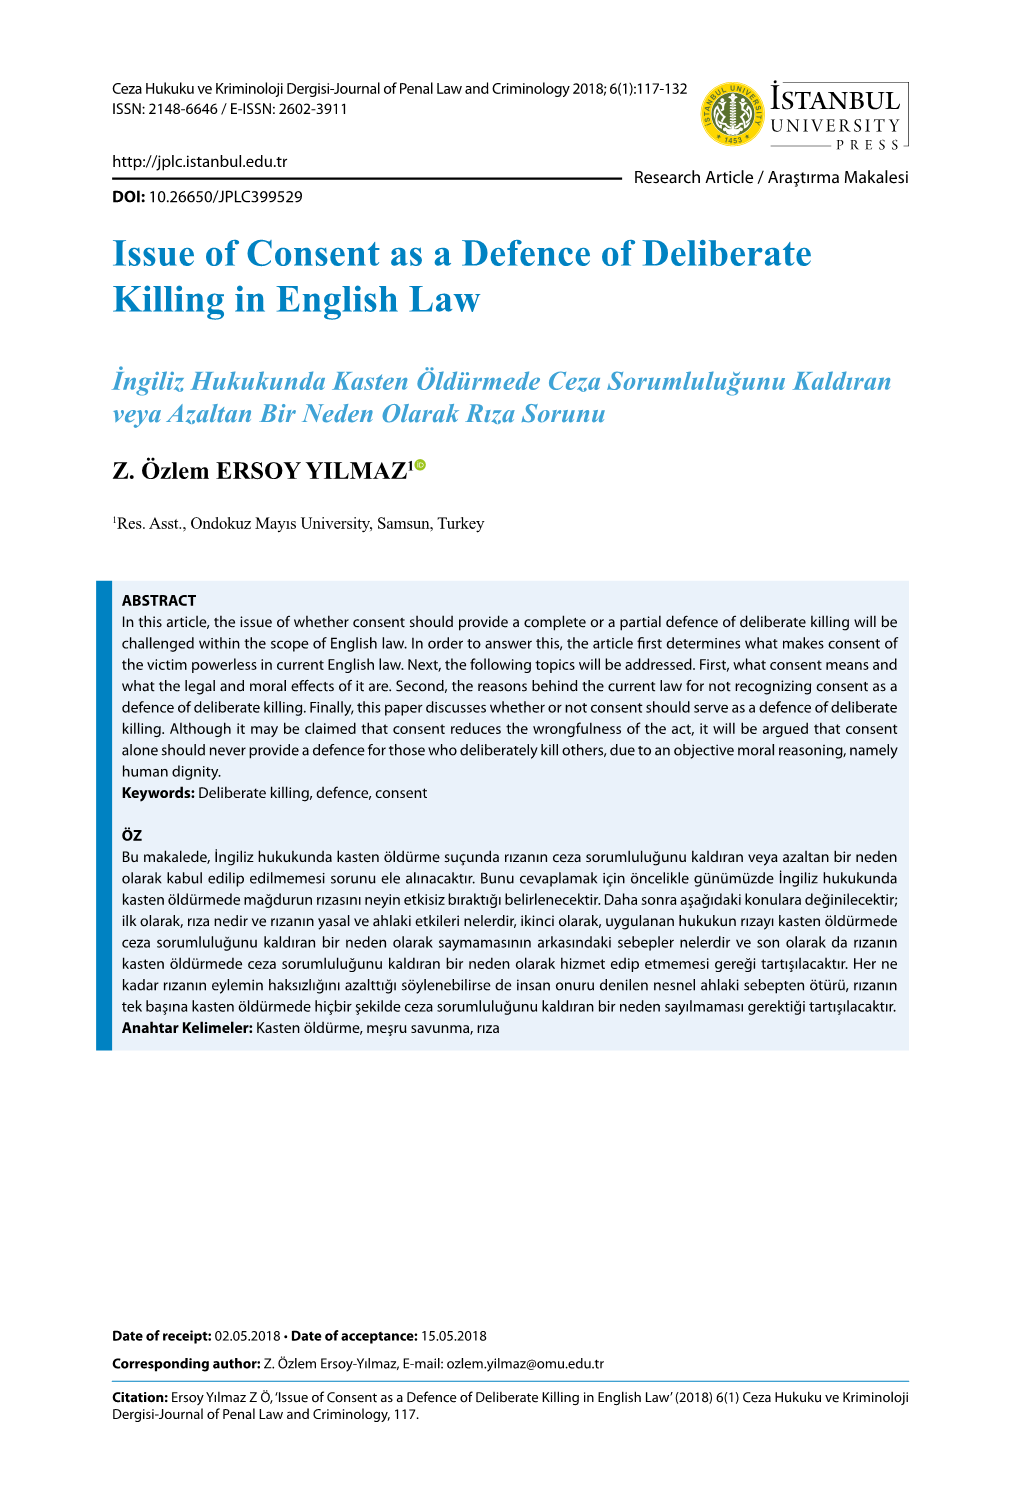 Issue of Consent As a Defence of Deliberate Killing in English Law